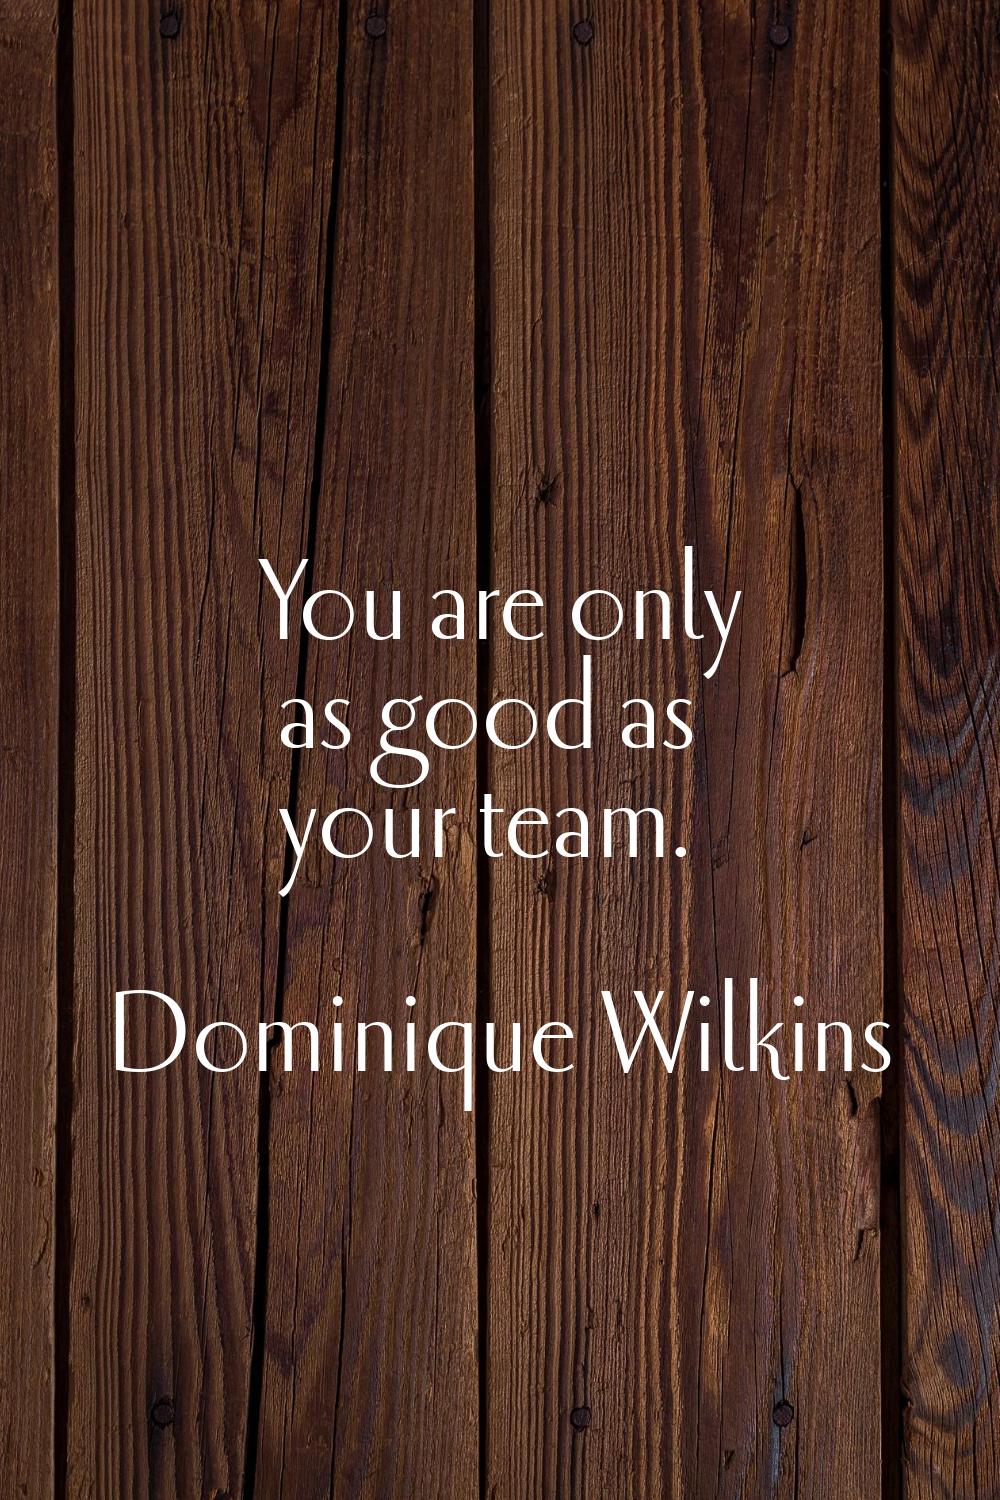 You are only as good as your team.